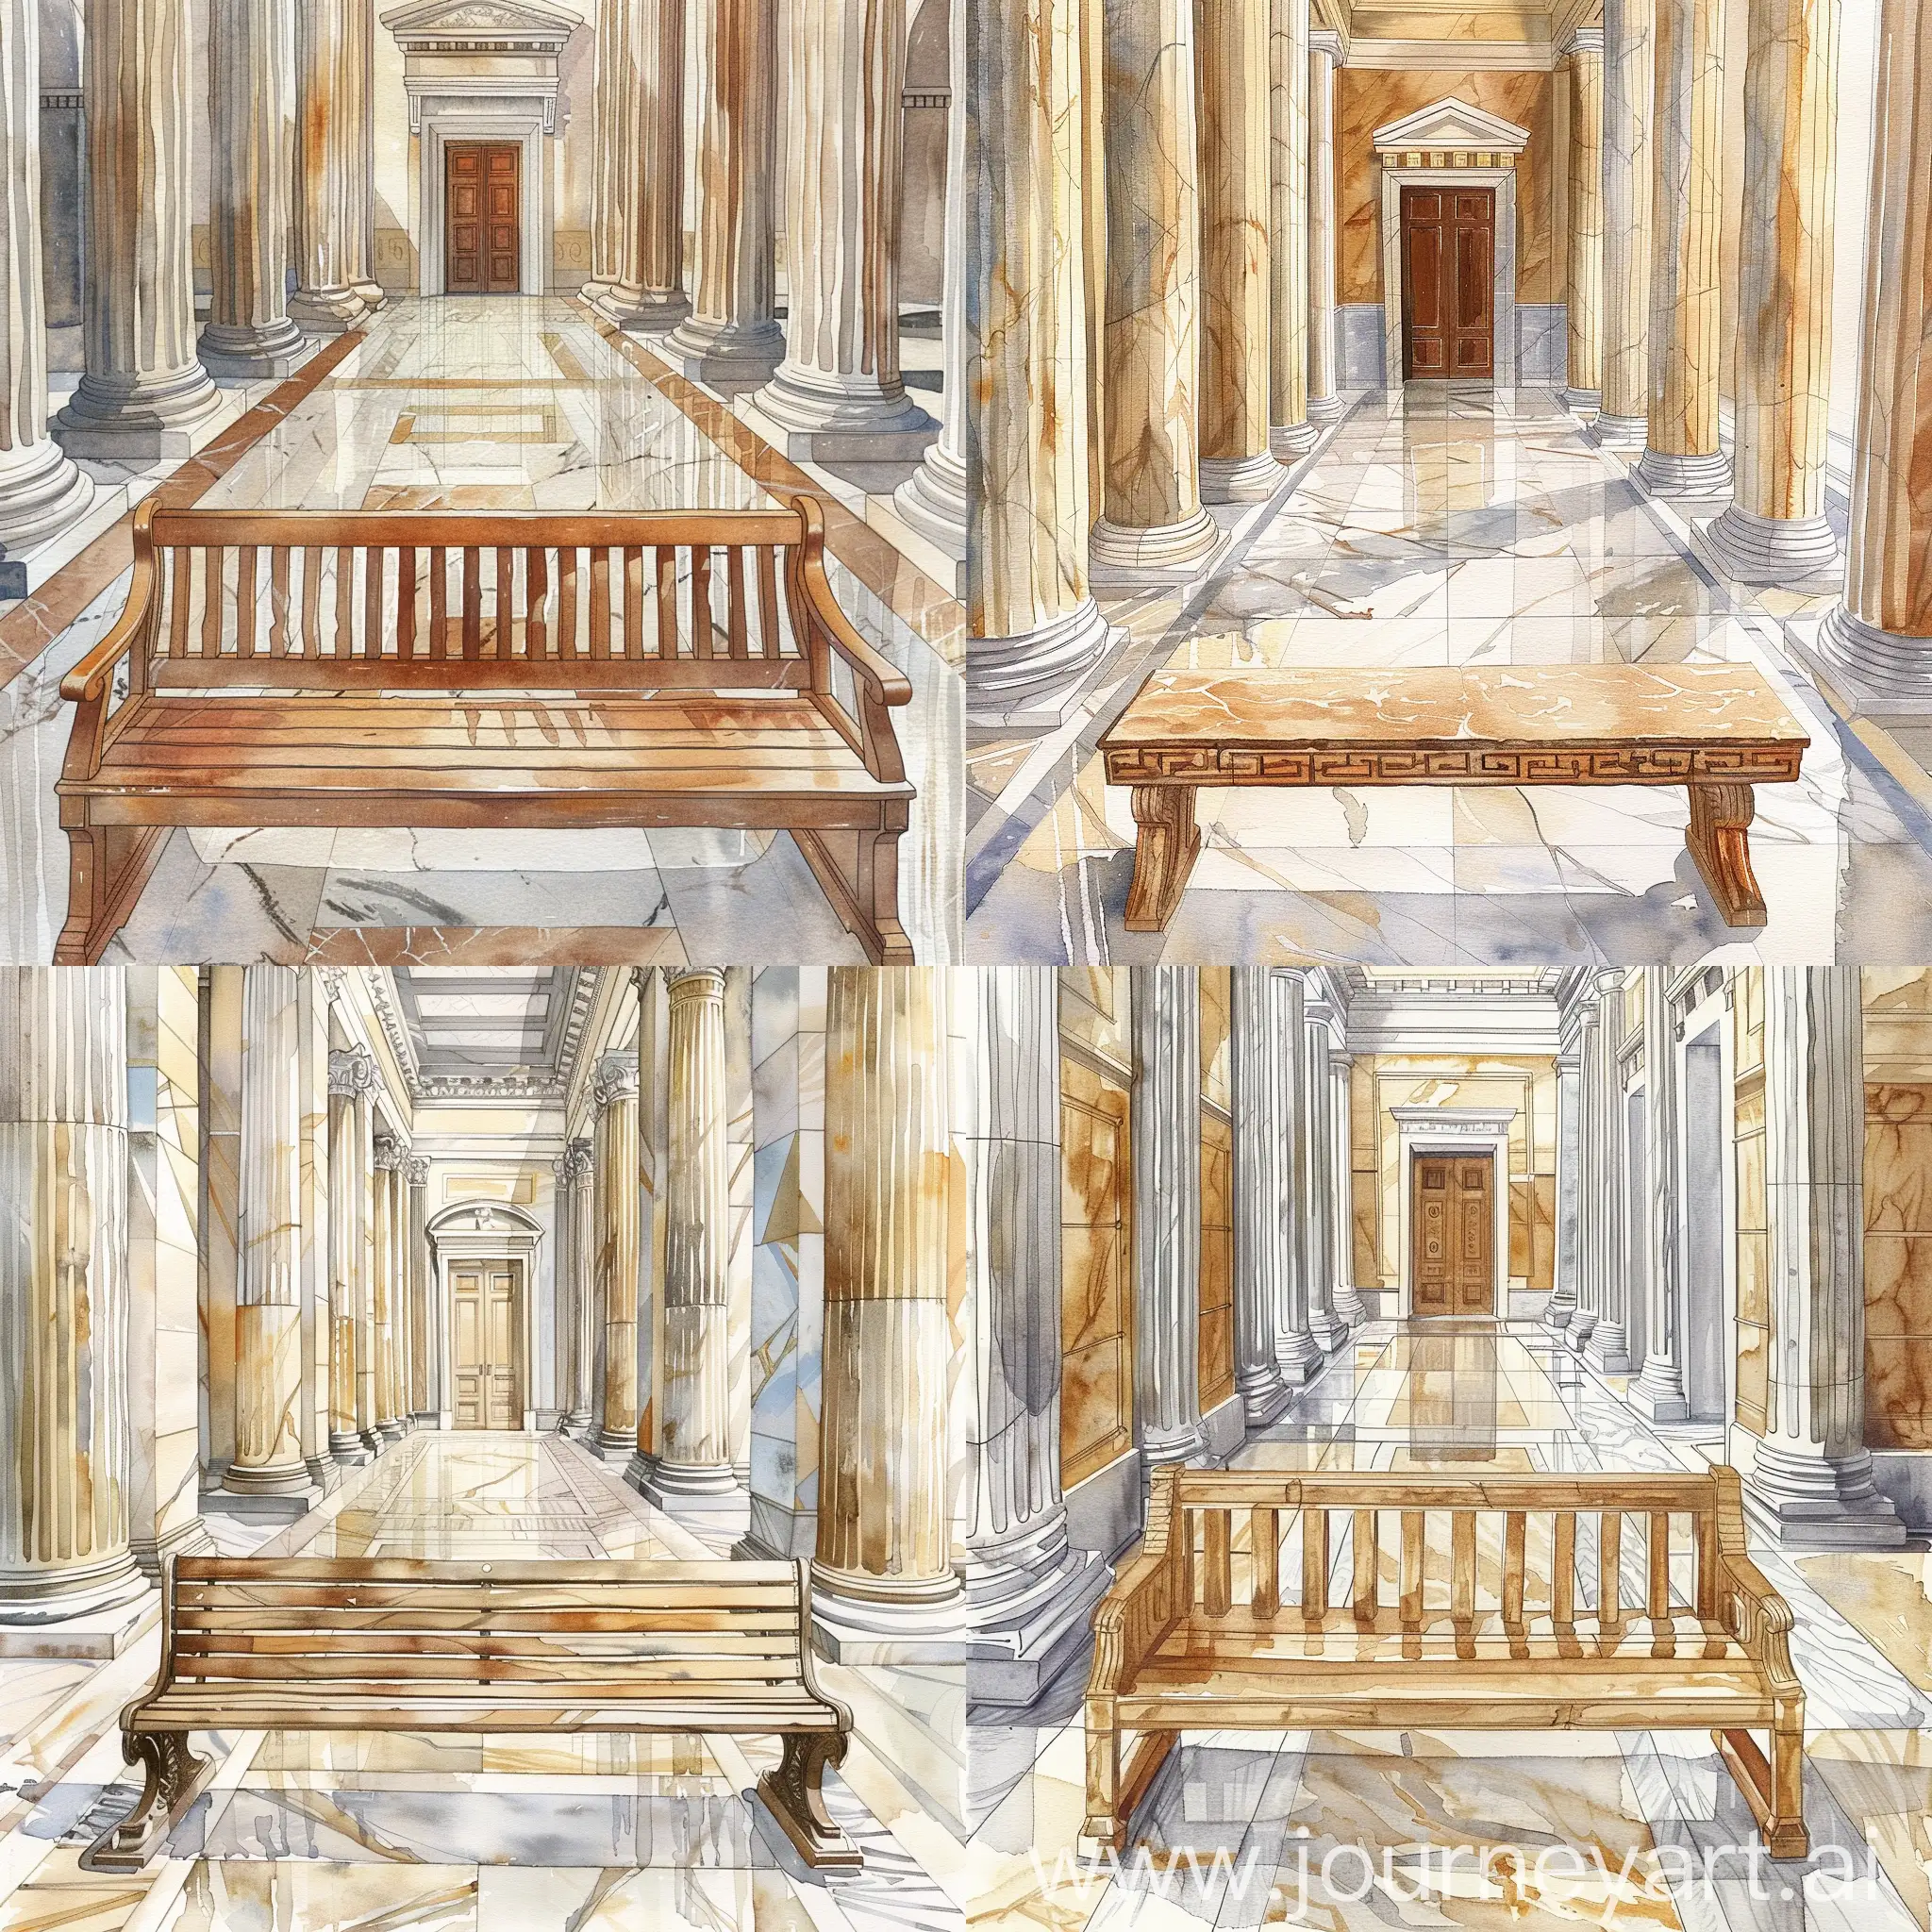 Watercolor-Illustration-Roman-Hall-Bench-with-Greek-Columns-and-Marble-Floor